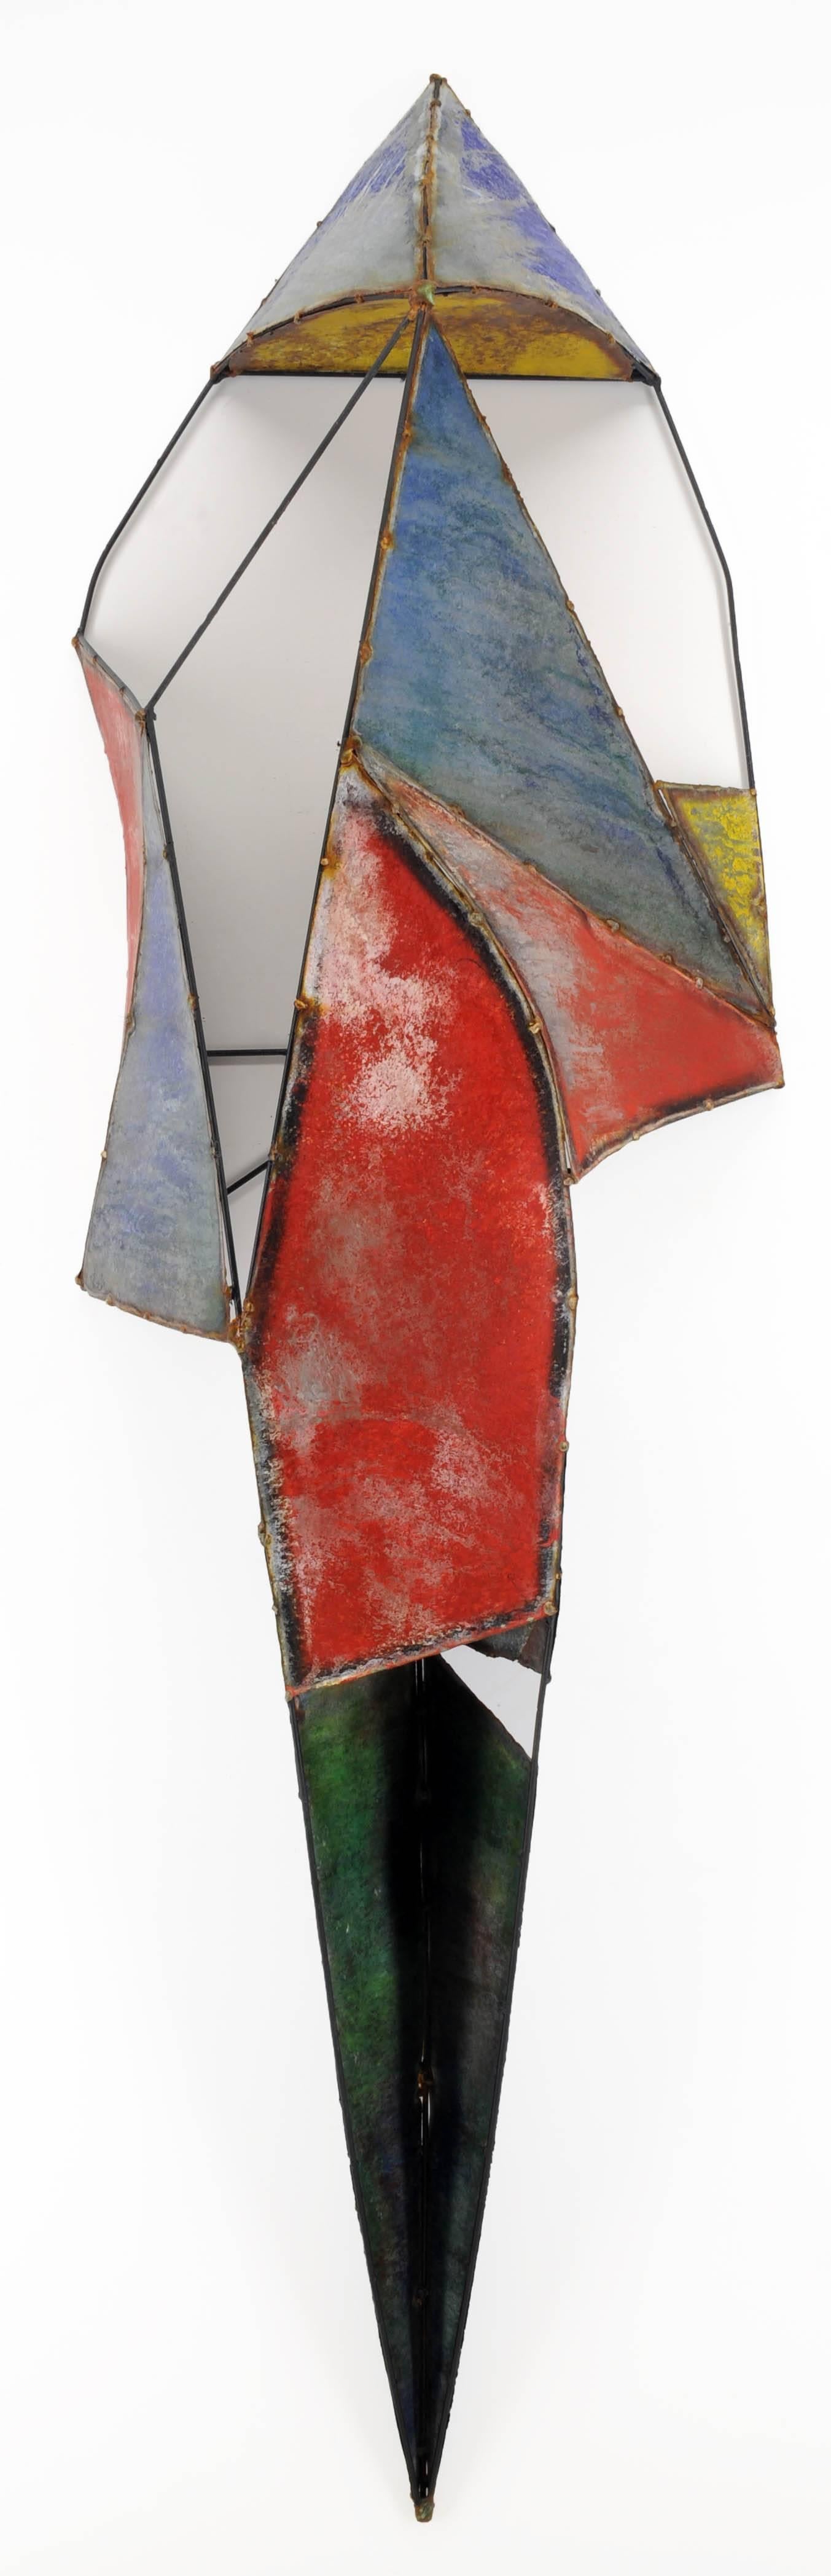 Nathan Slate Joseph Abstract Sculpture - Large Boat WALL SCULPTURE CONTEMPORARY ABSTRACT 